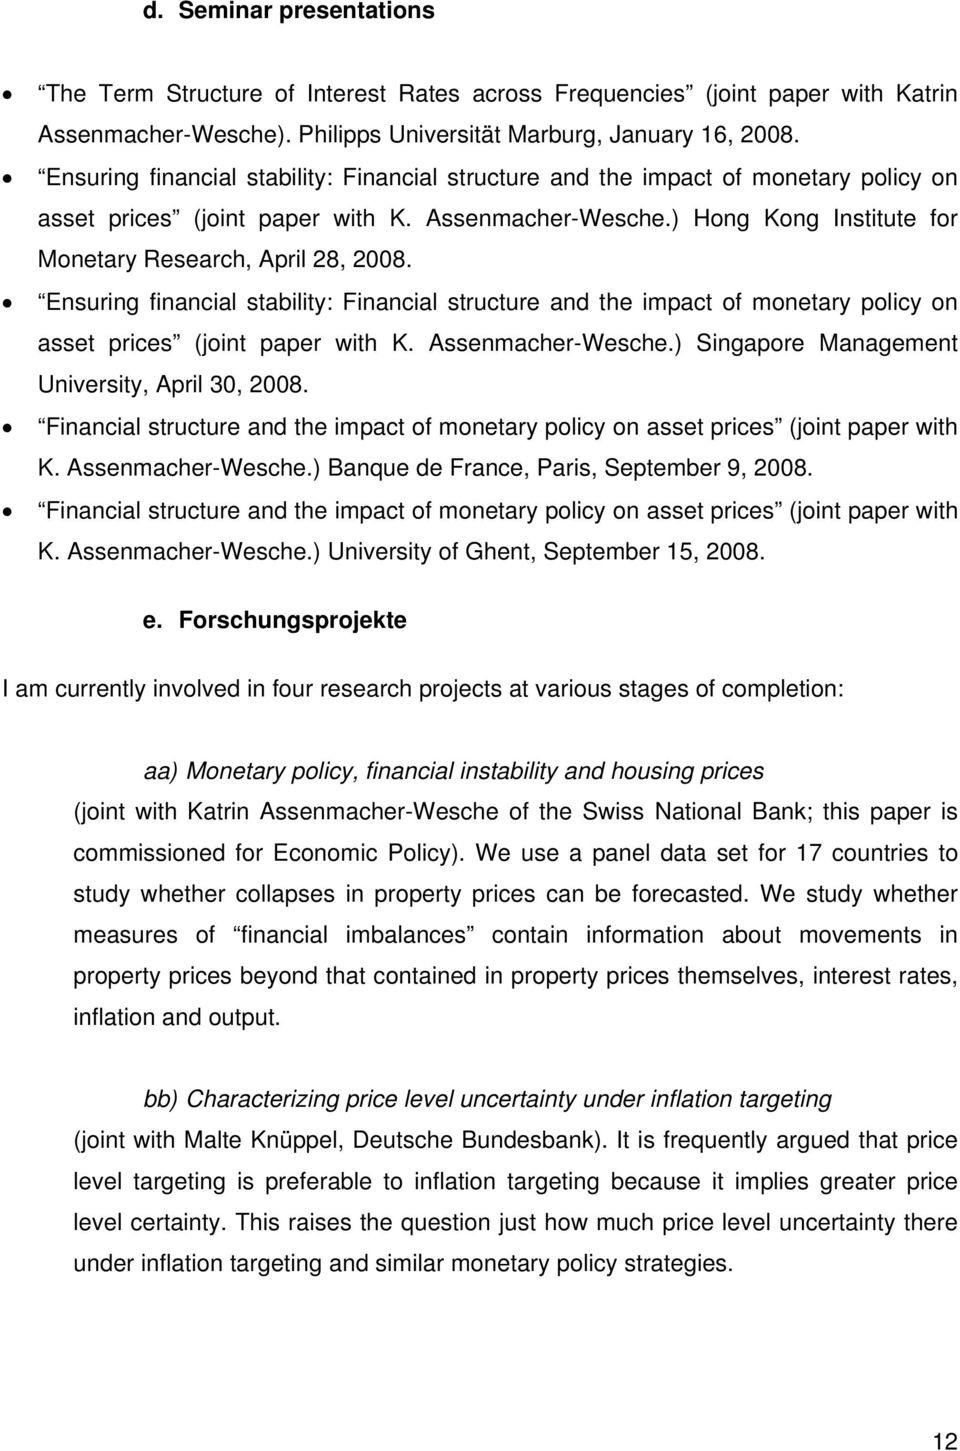 Ensuring financial stability: Financial structure and the impact of monetary policy on asset prices (joint paper with K. Assenmacher-Wesche.) Singapore Management University, April 30, 2008.